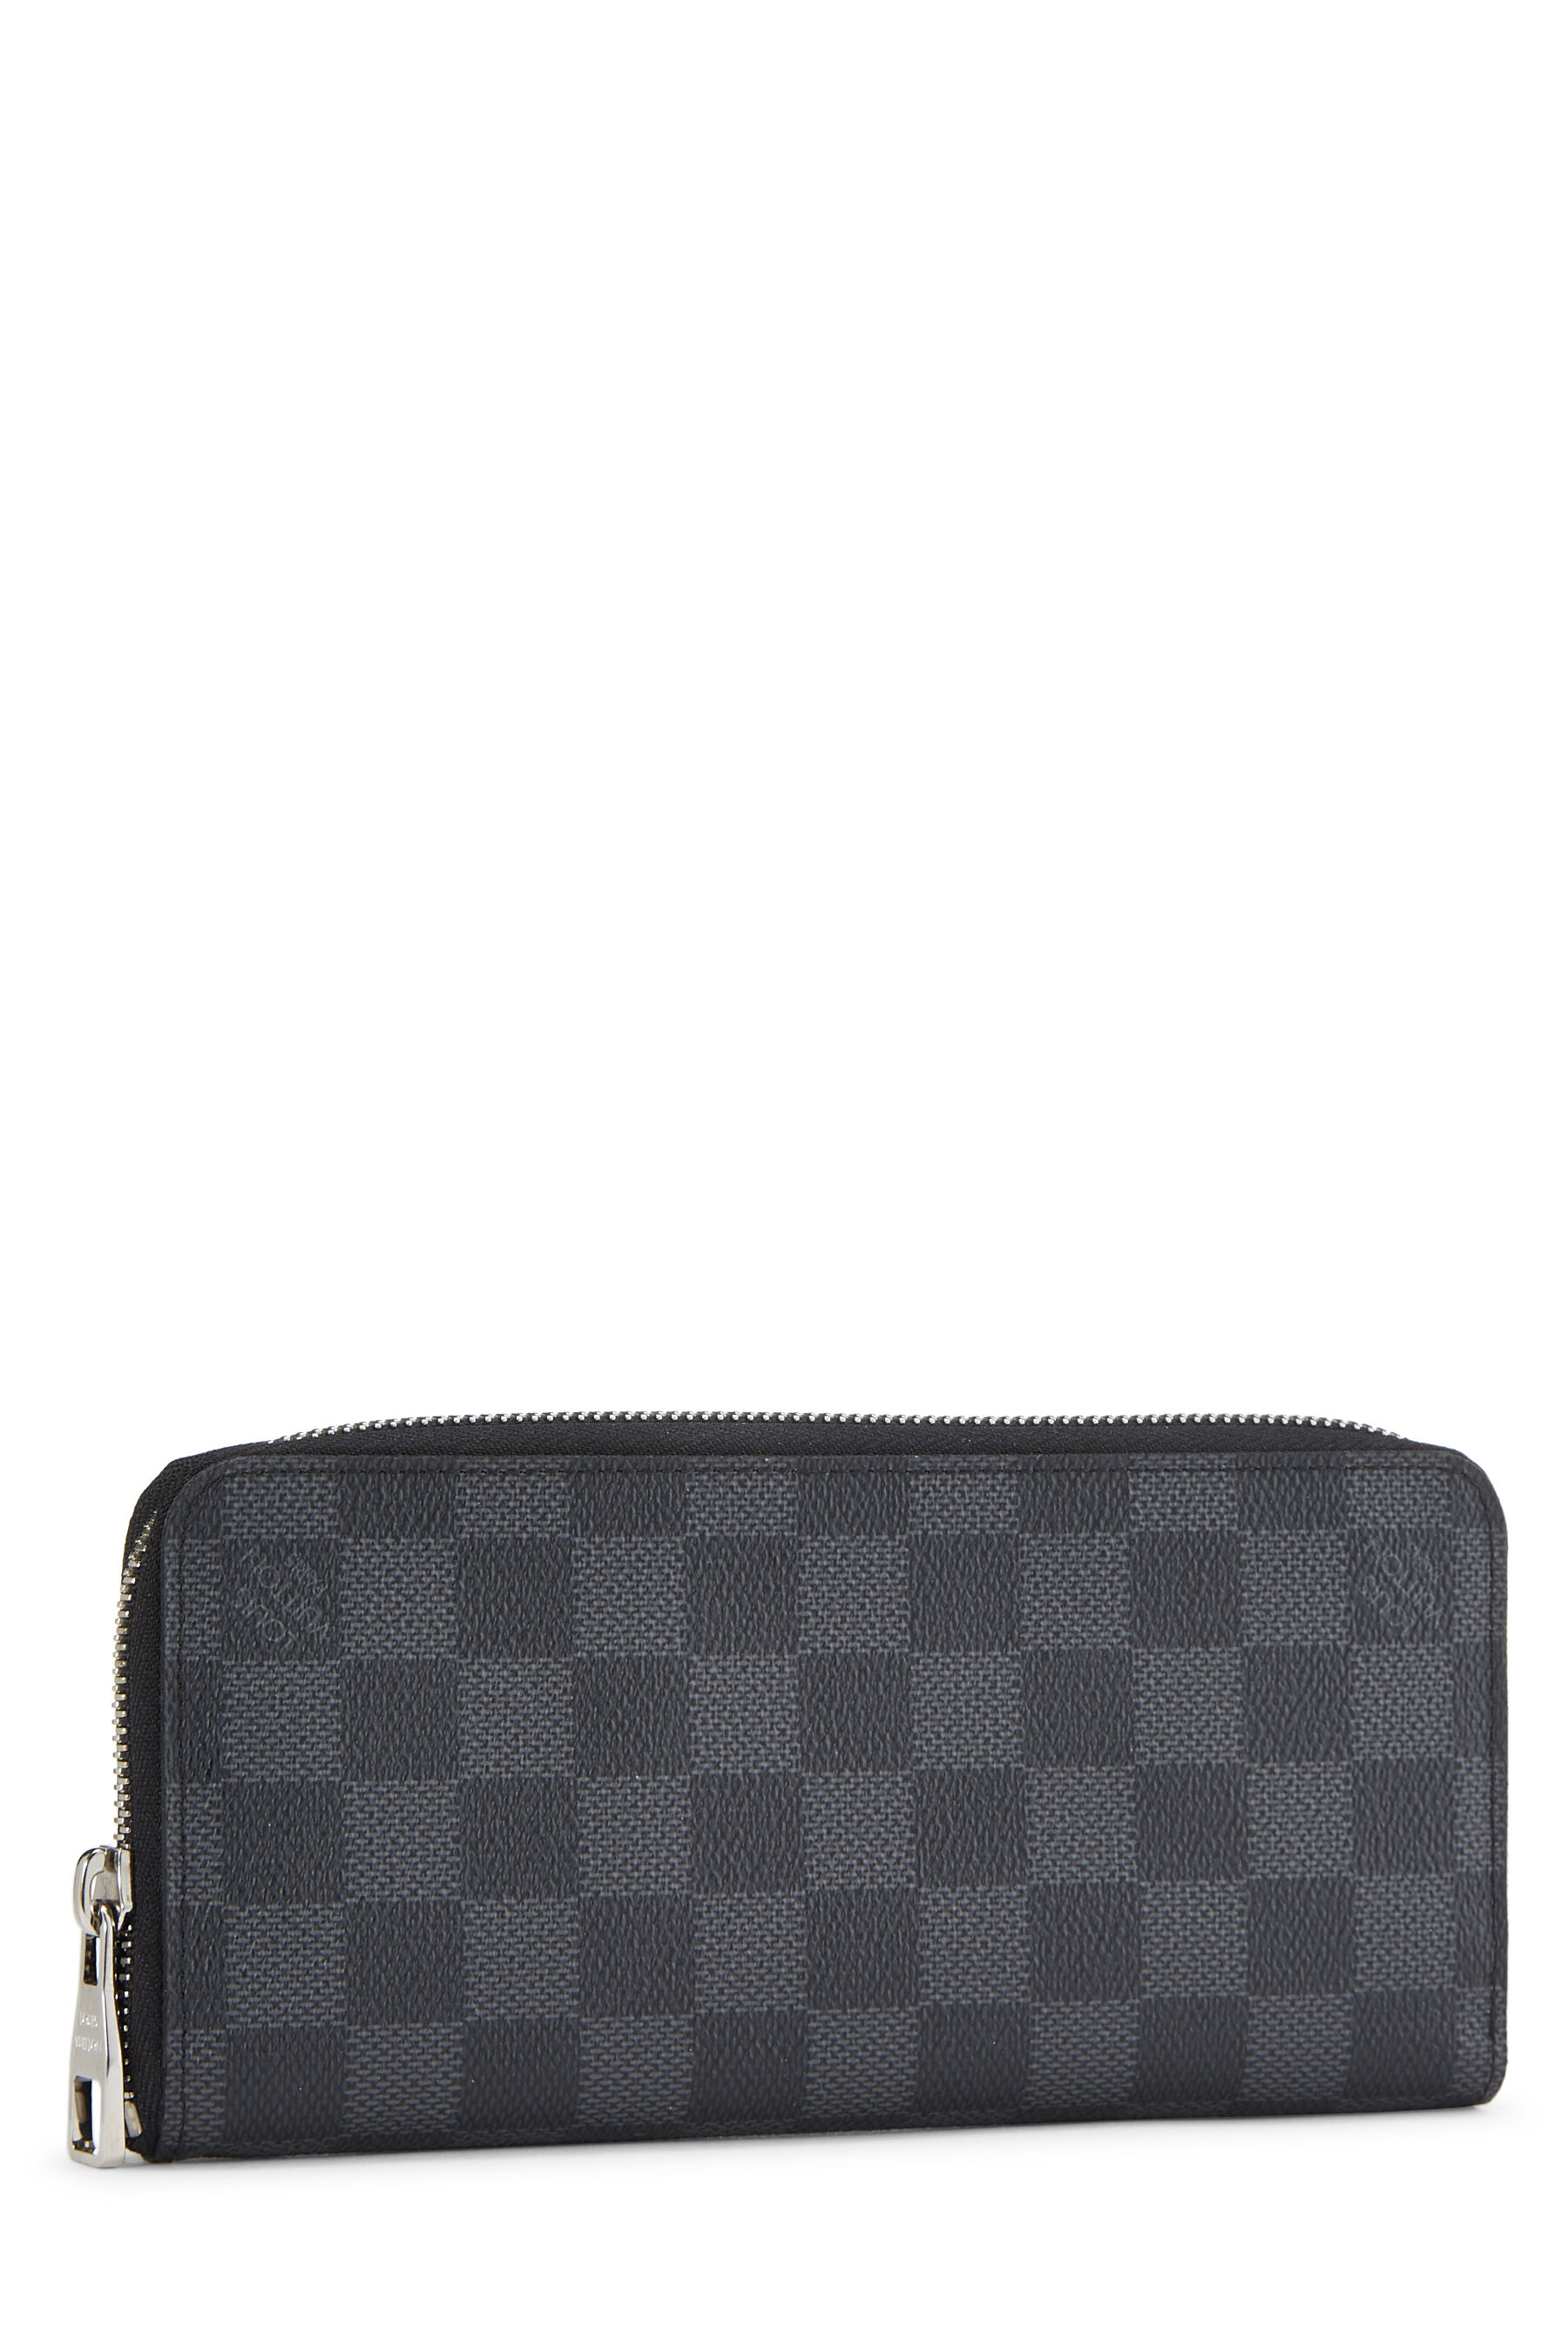 Zippy XL Wallet Damier Infini Leather - Wallets and Small Leather Goods